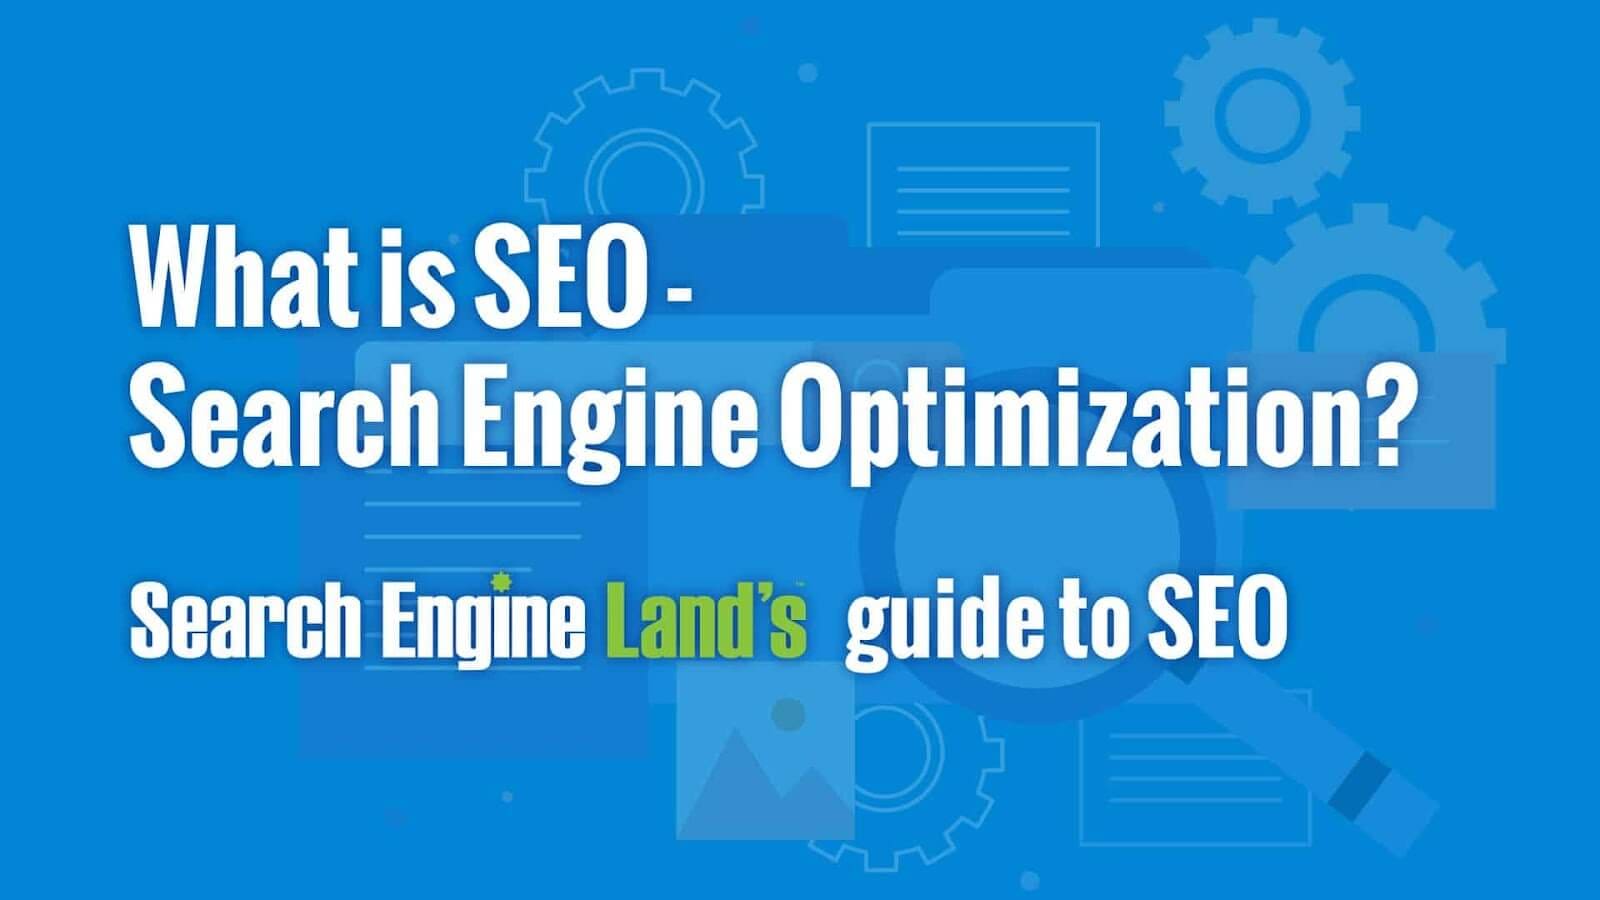 3. How to Evaluate the SEO of Your Website